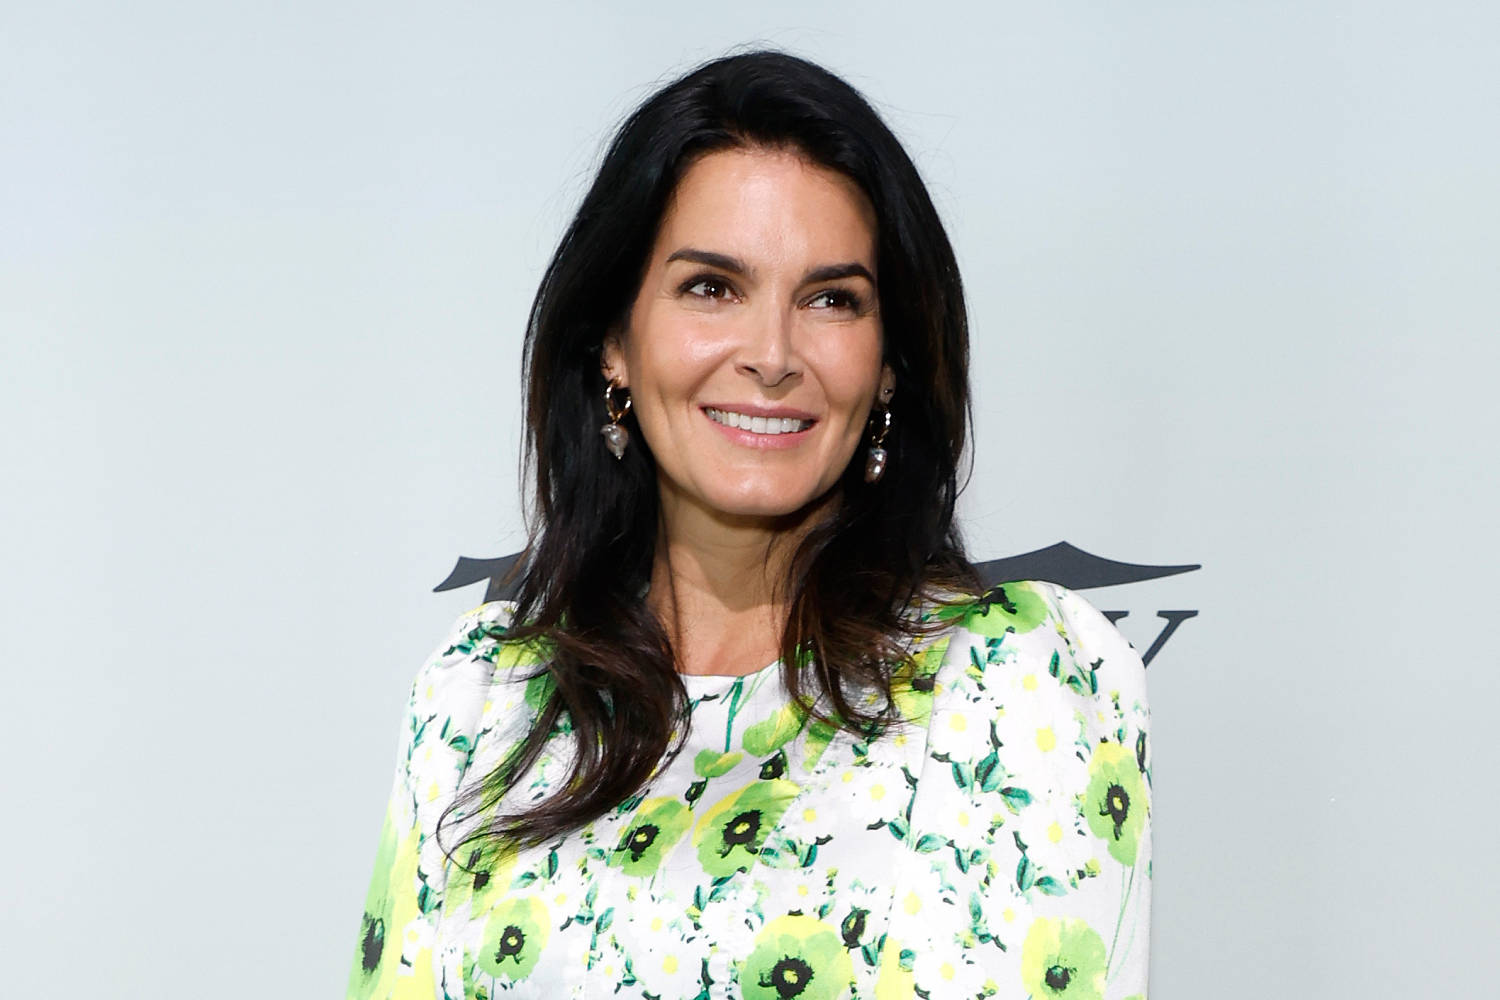 Actress Angie Harmon files suit after dog shot and killed by Instacart shopper